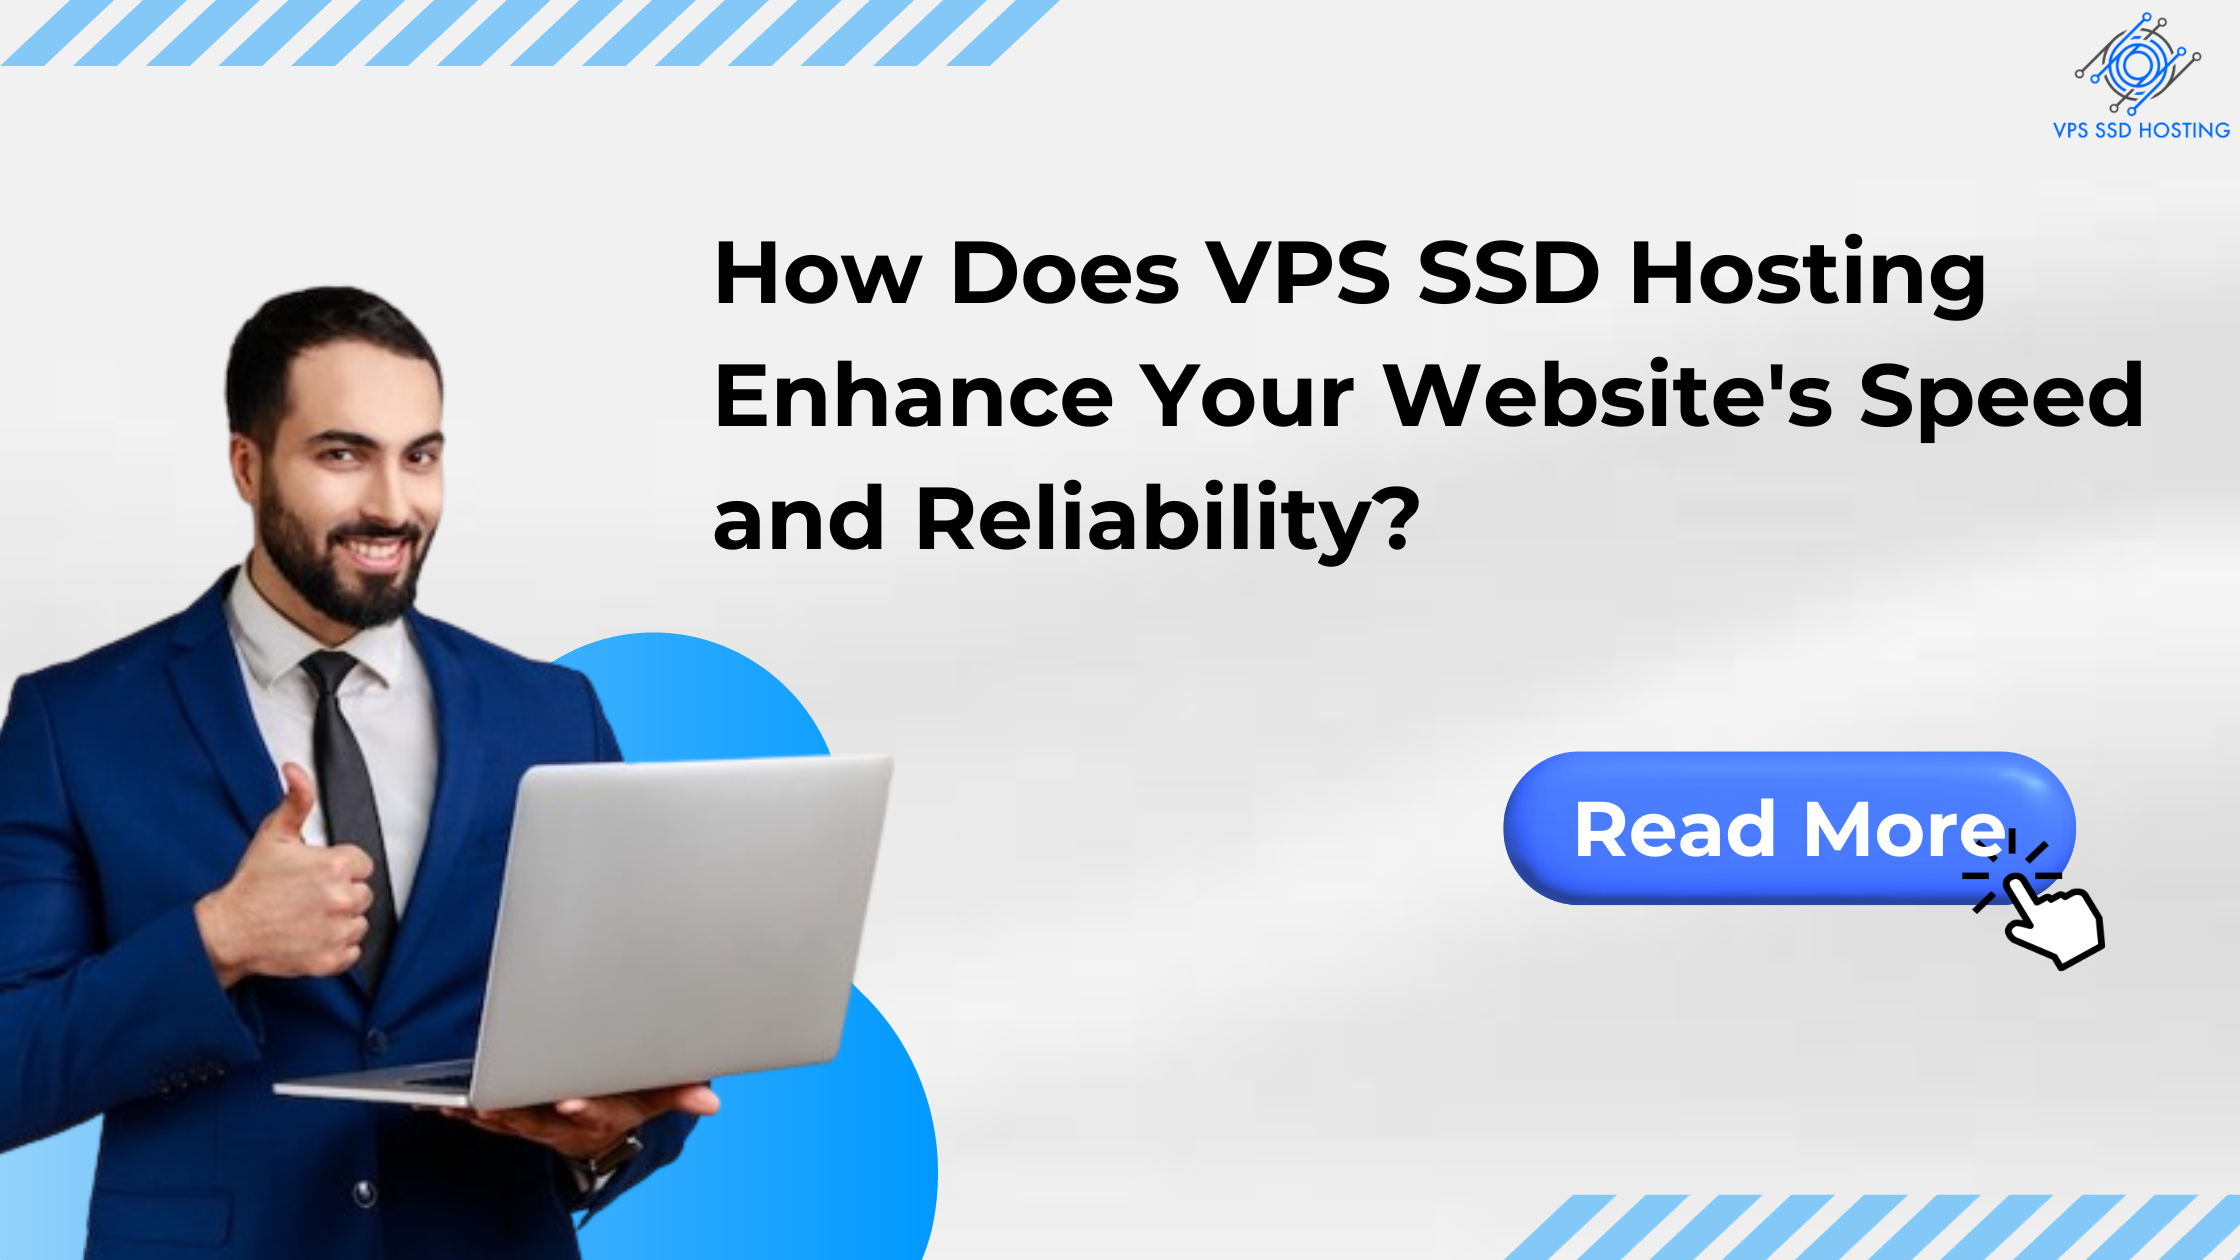 How Does VPS SSD Hosting Enhance Your Website's Speed and Reliability